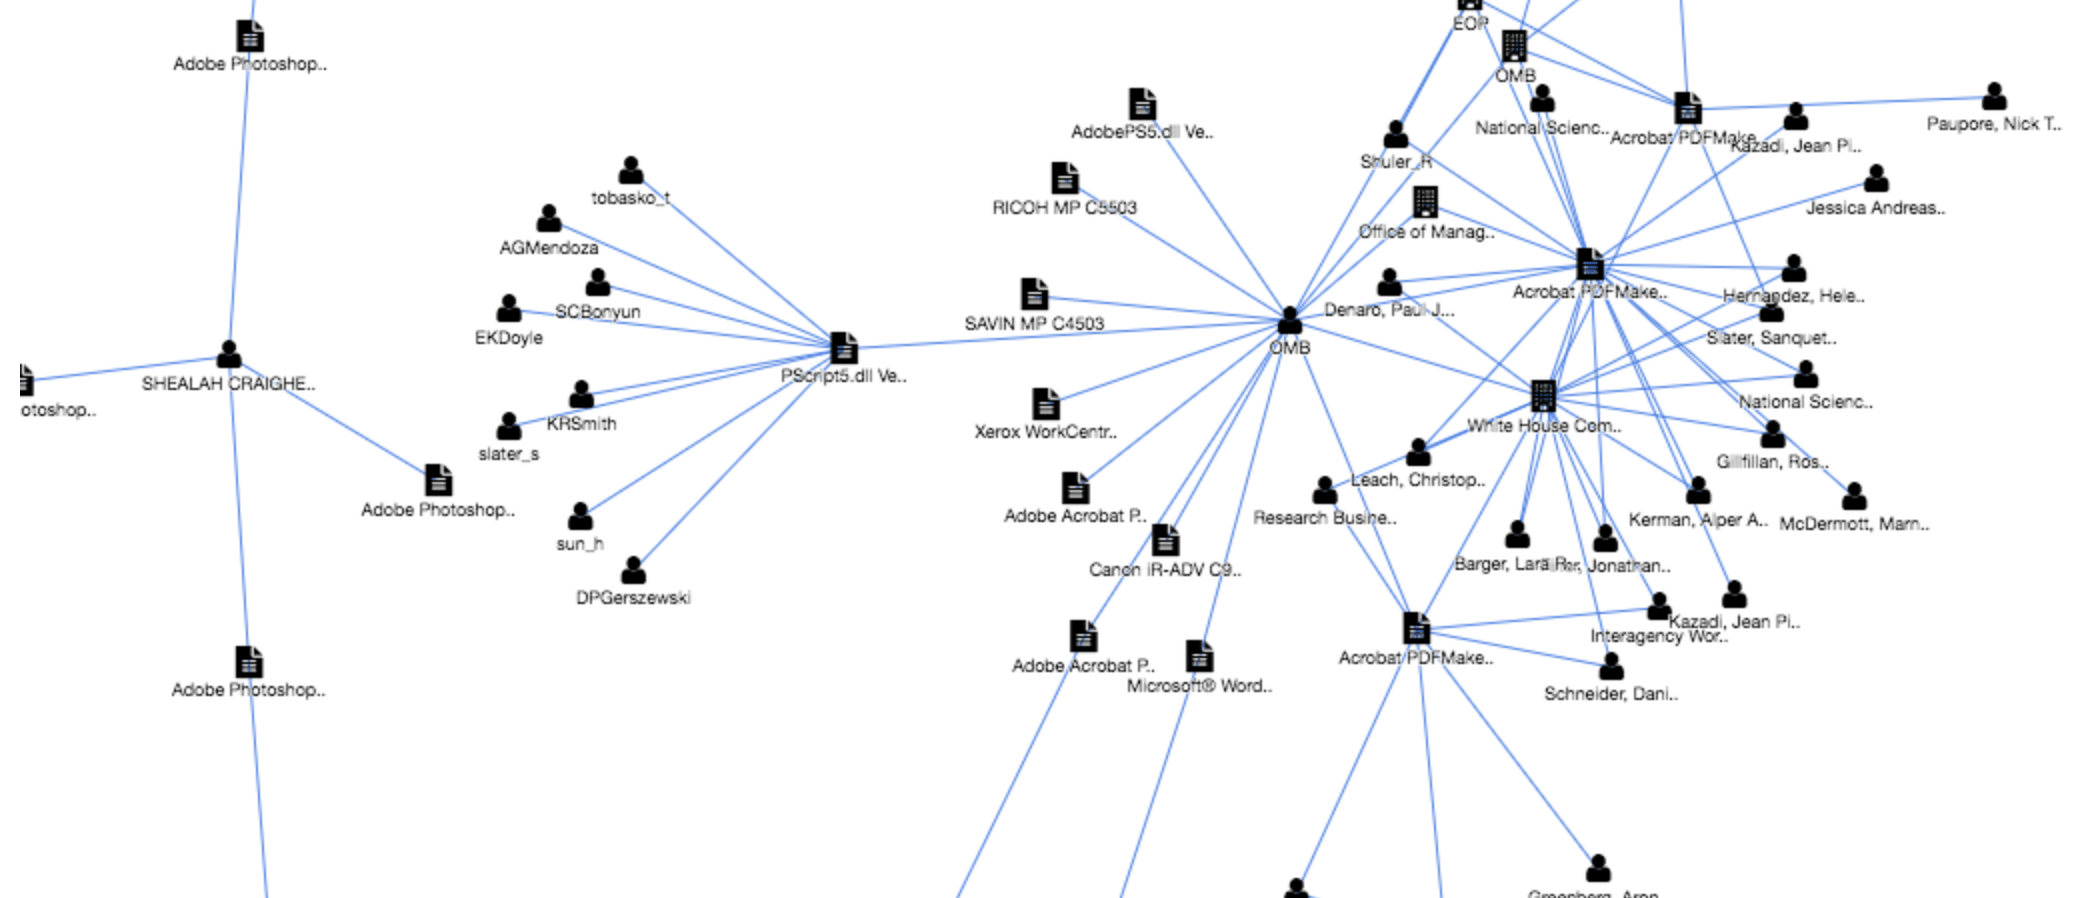 Metadata relationships graph from Sweepatic portal